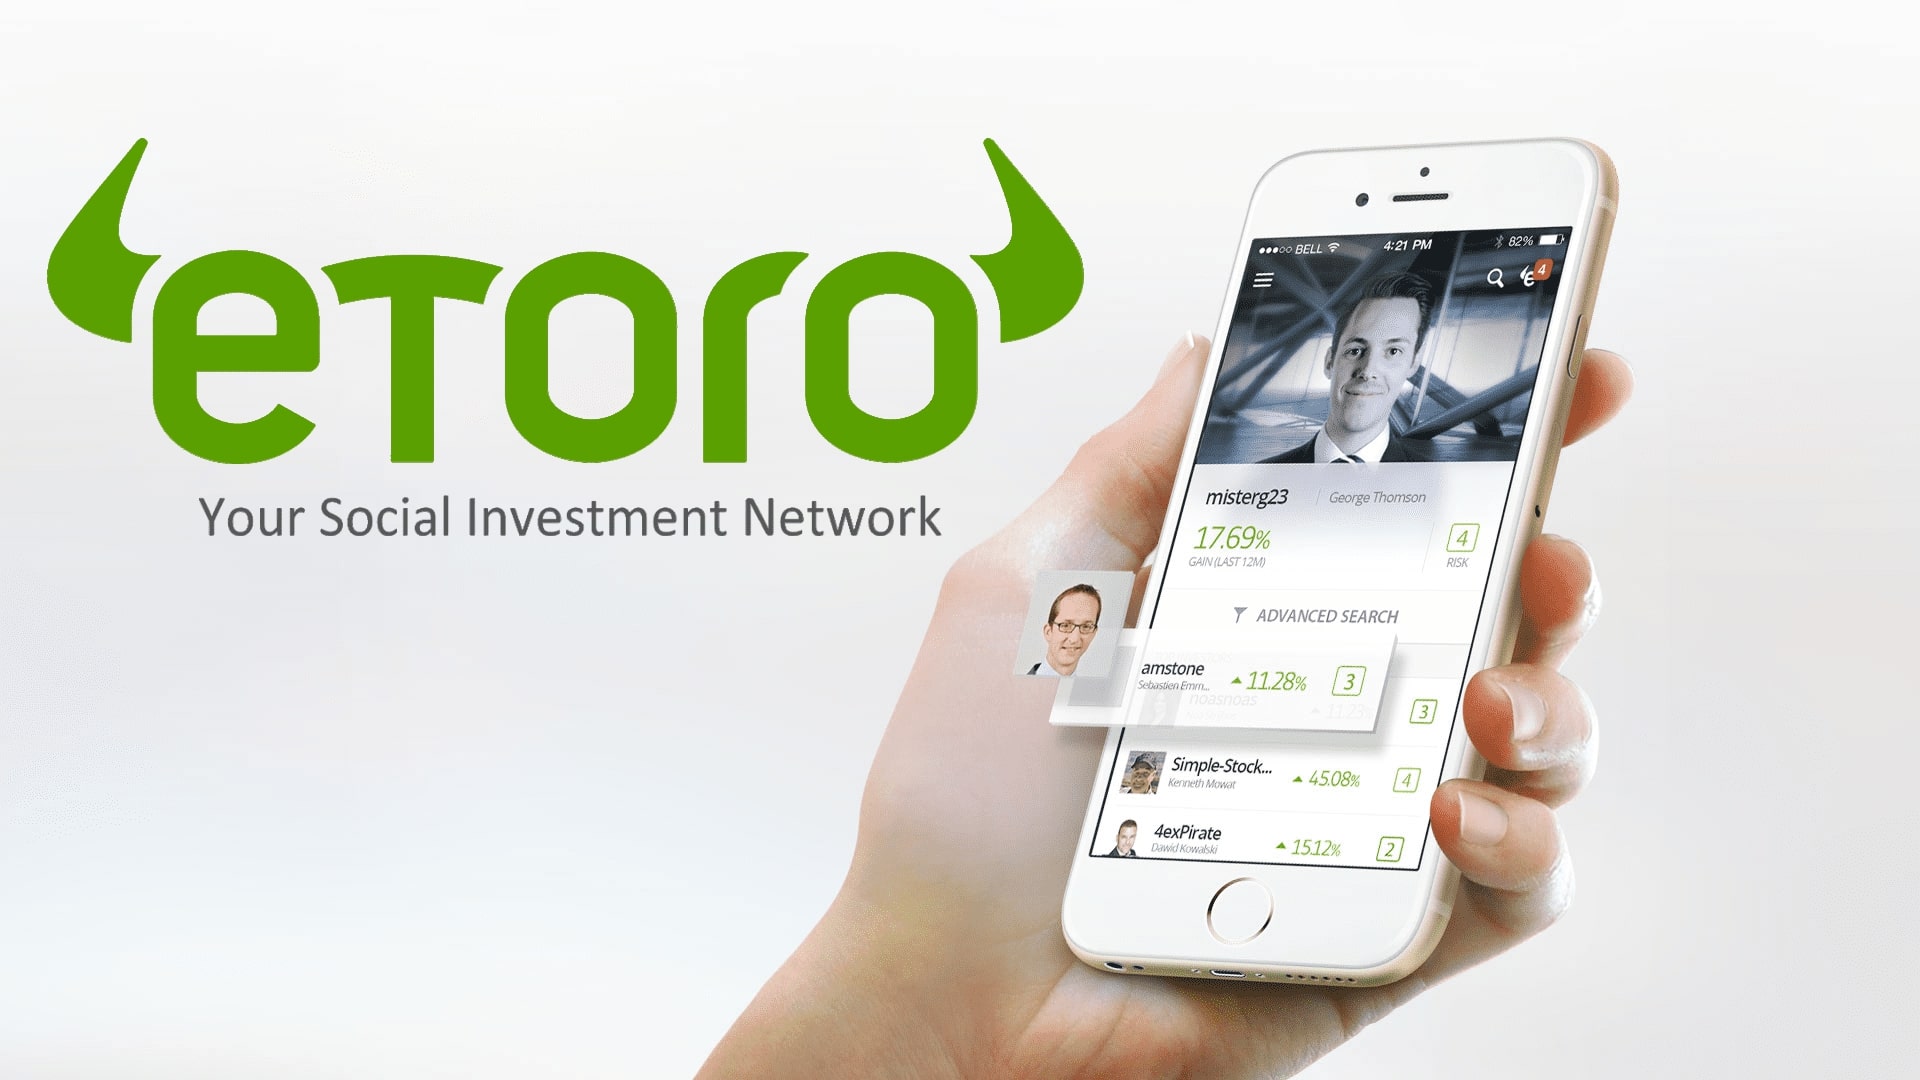 eToro expands investment offerings with 14 new stocks and ETFs